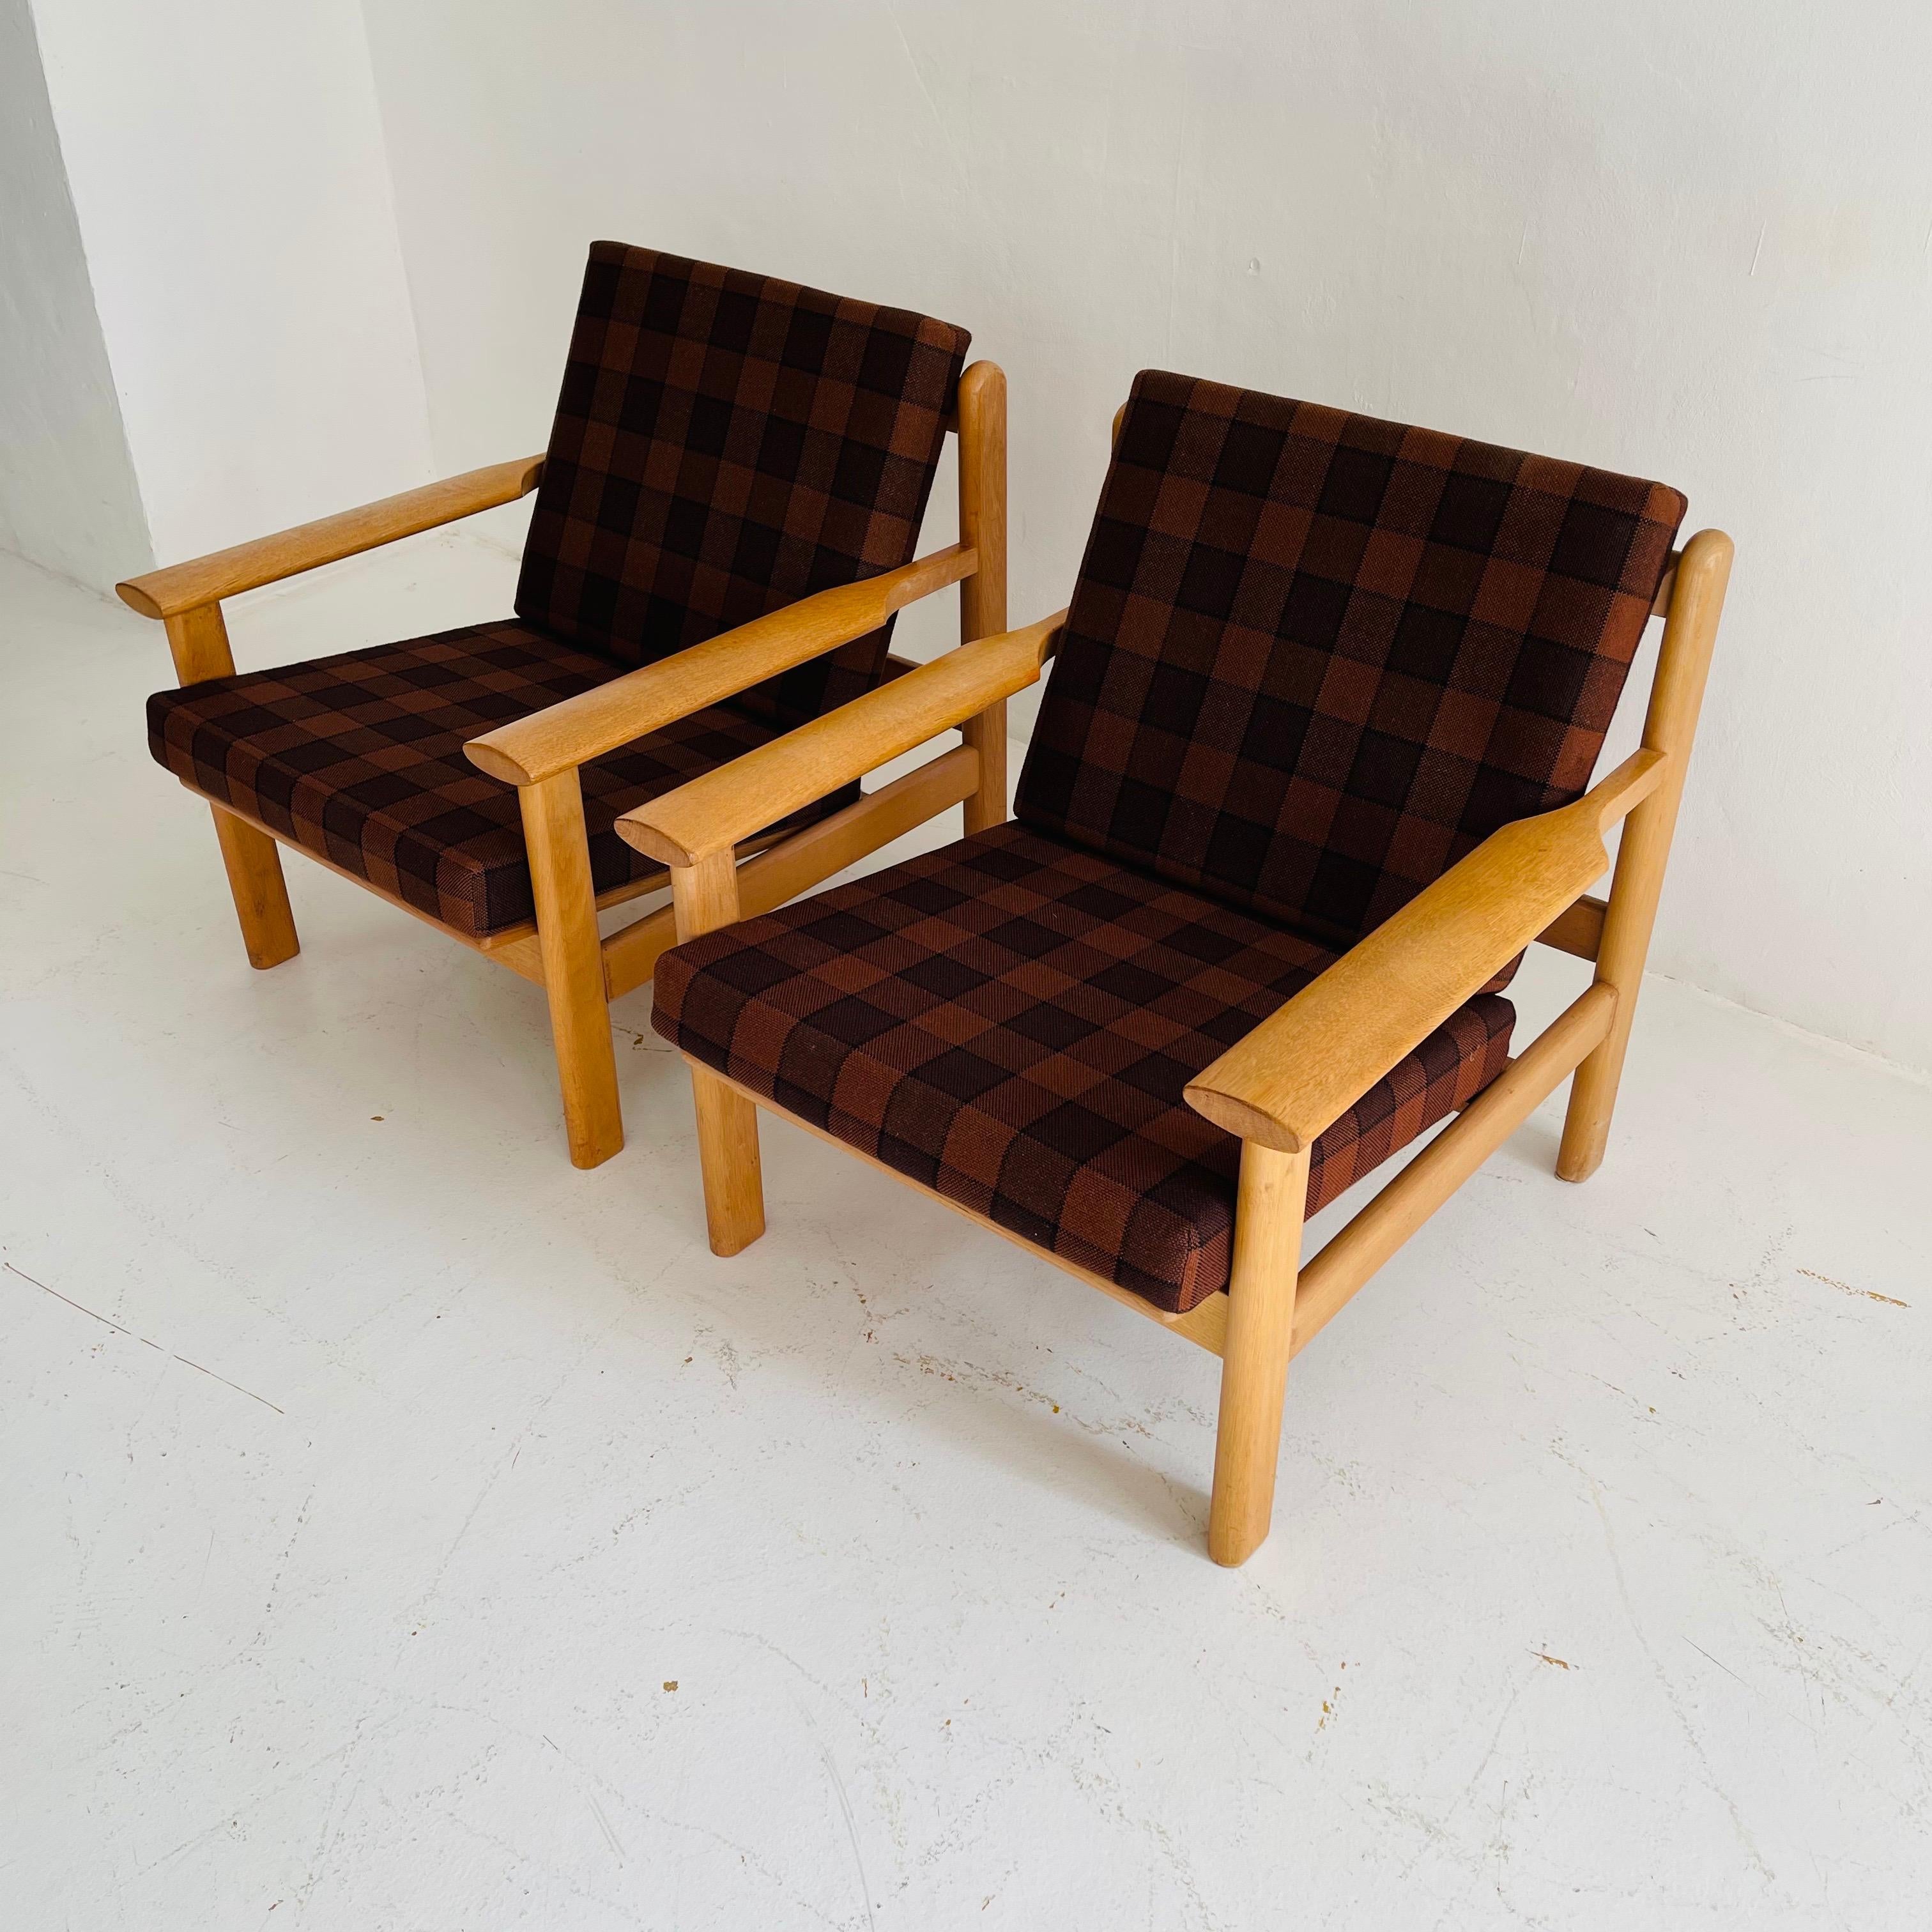 Living Room Suite Sofa Lounge Chair by Poul Volther for Frem Rølje, Denmark 1950 For Sale 6